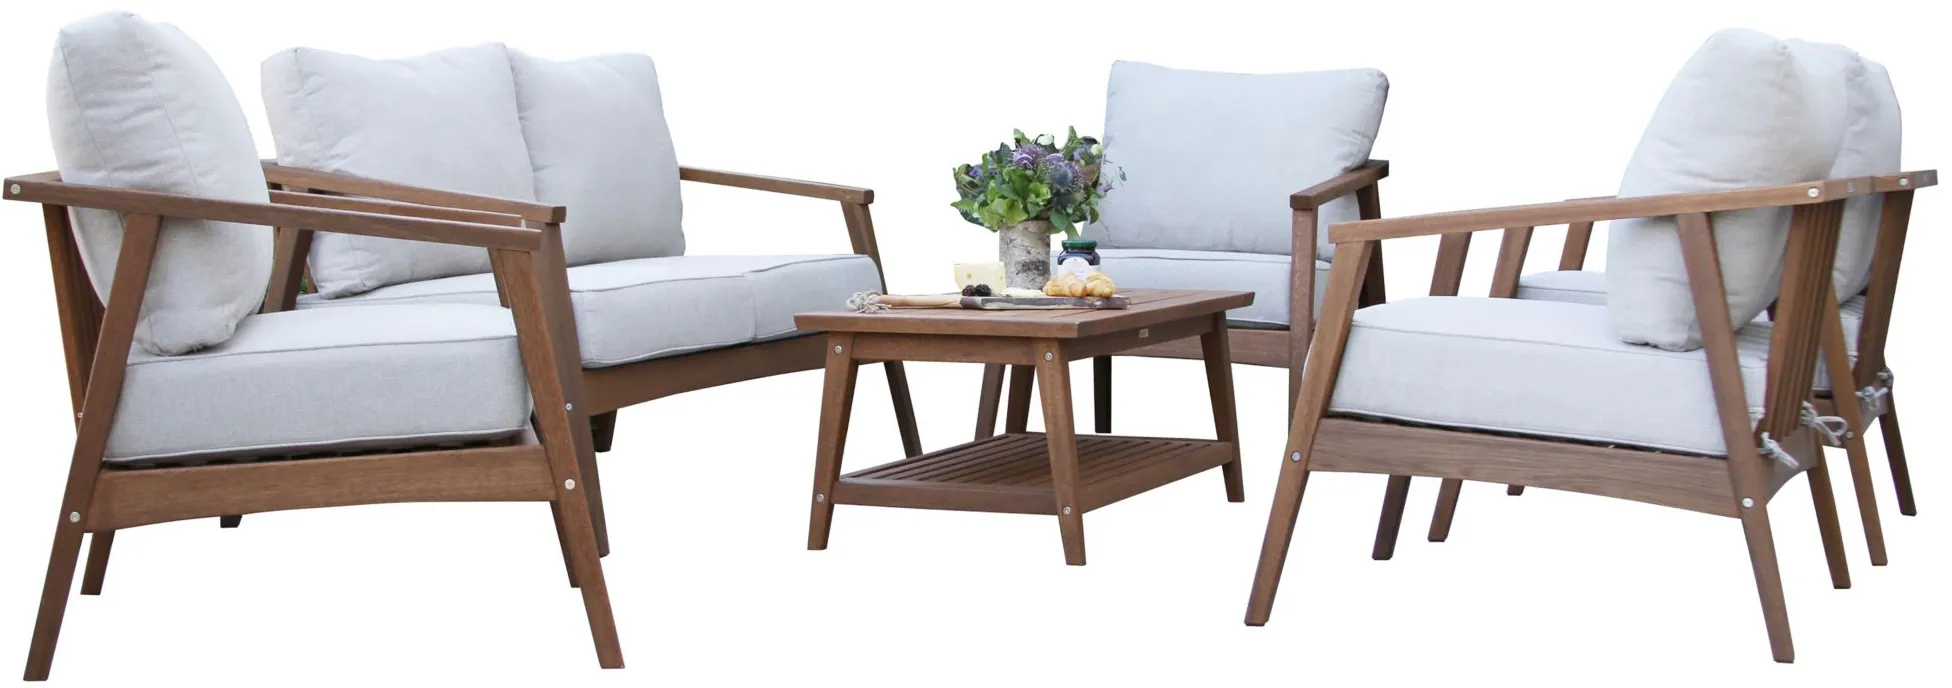 Bohemian 6 pc. Modern Seating Group in Brown by Outdoor Interiors